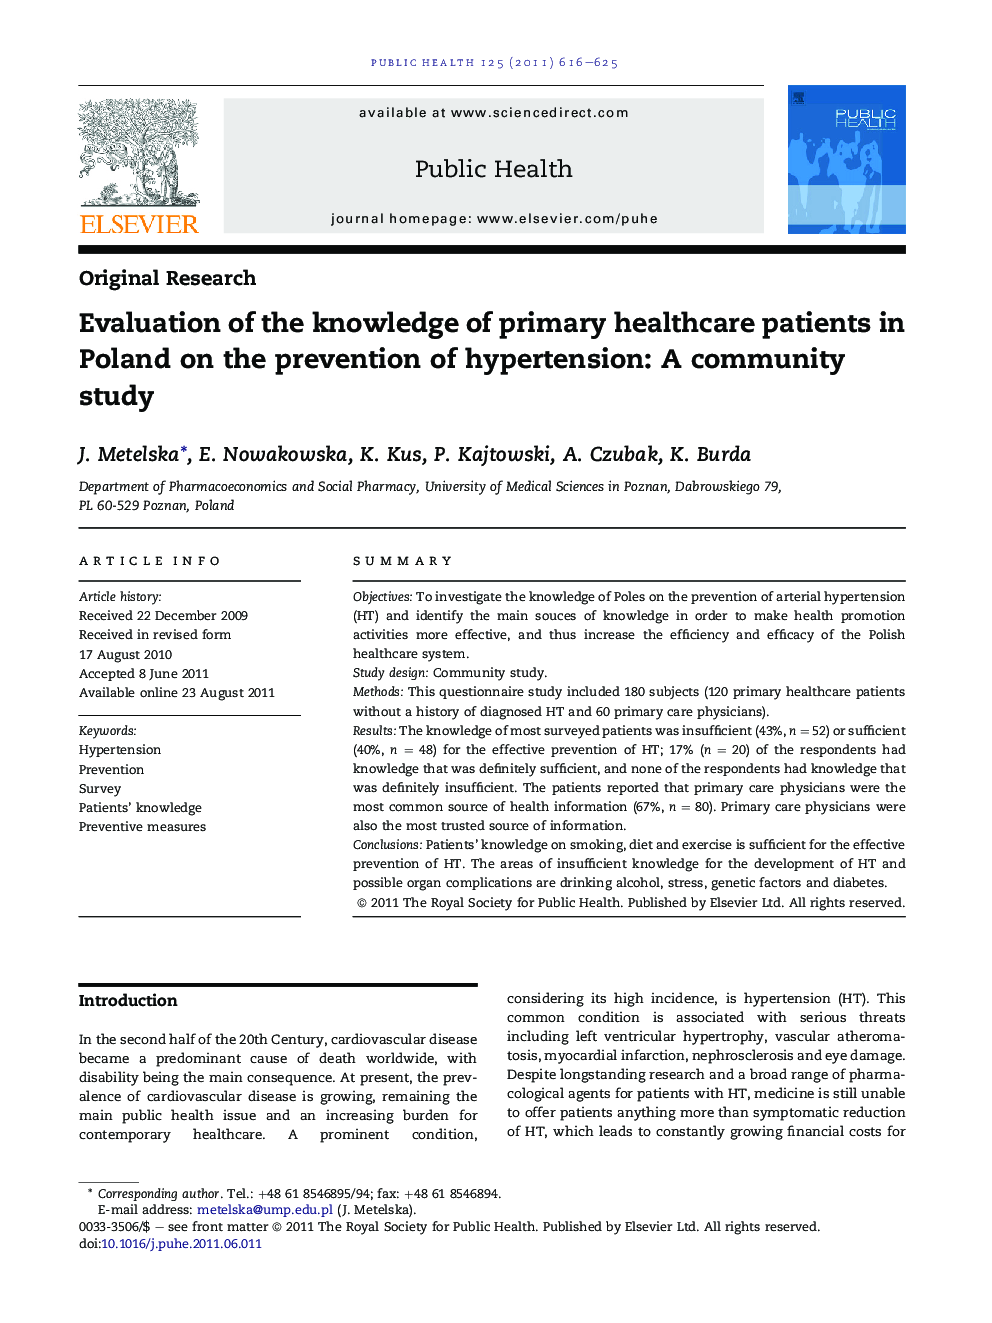 Evaluation of the knowledge of primary healthcare patients in Poland on the prevention of hypertension: A community study